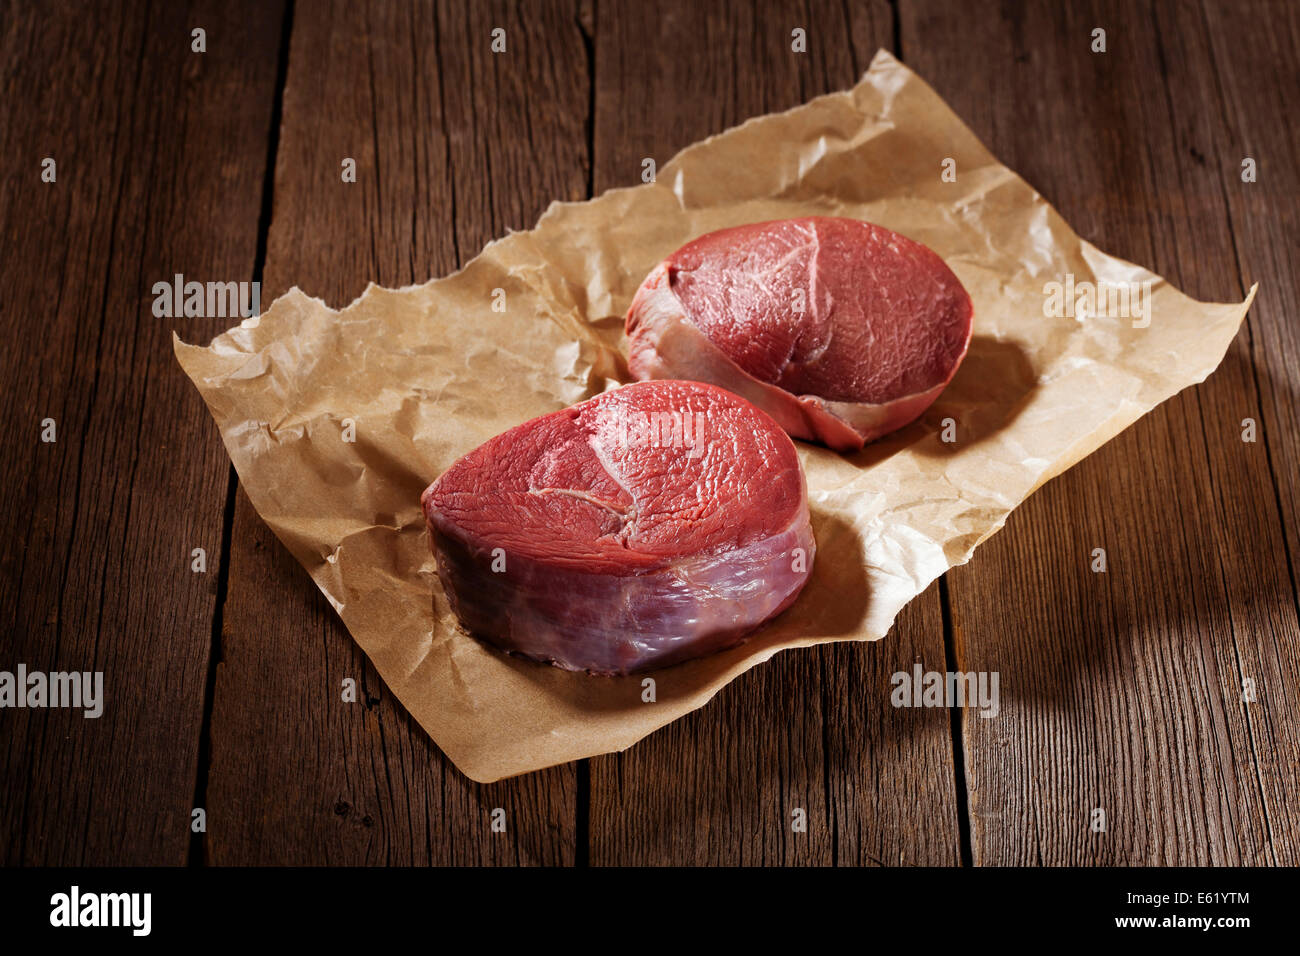 Raw beef steak on wooden table. Stock Photo